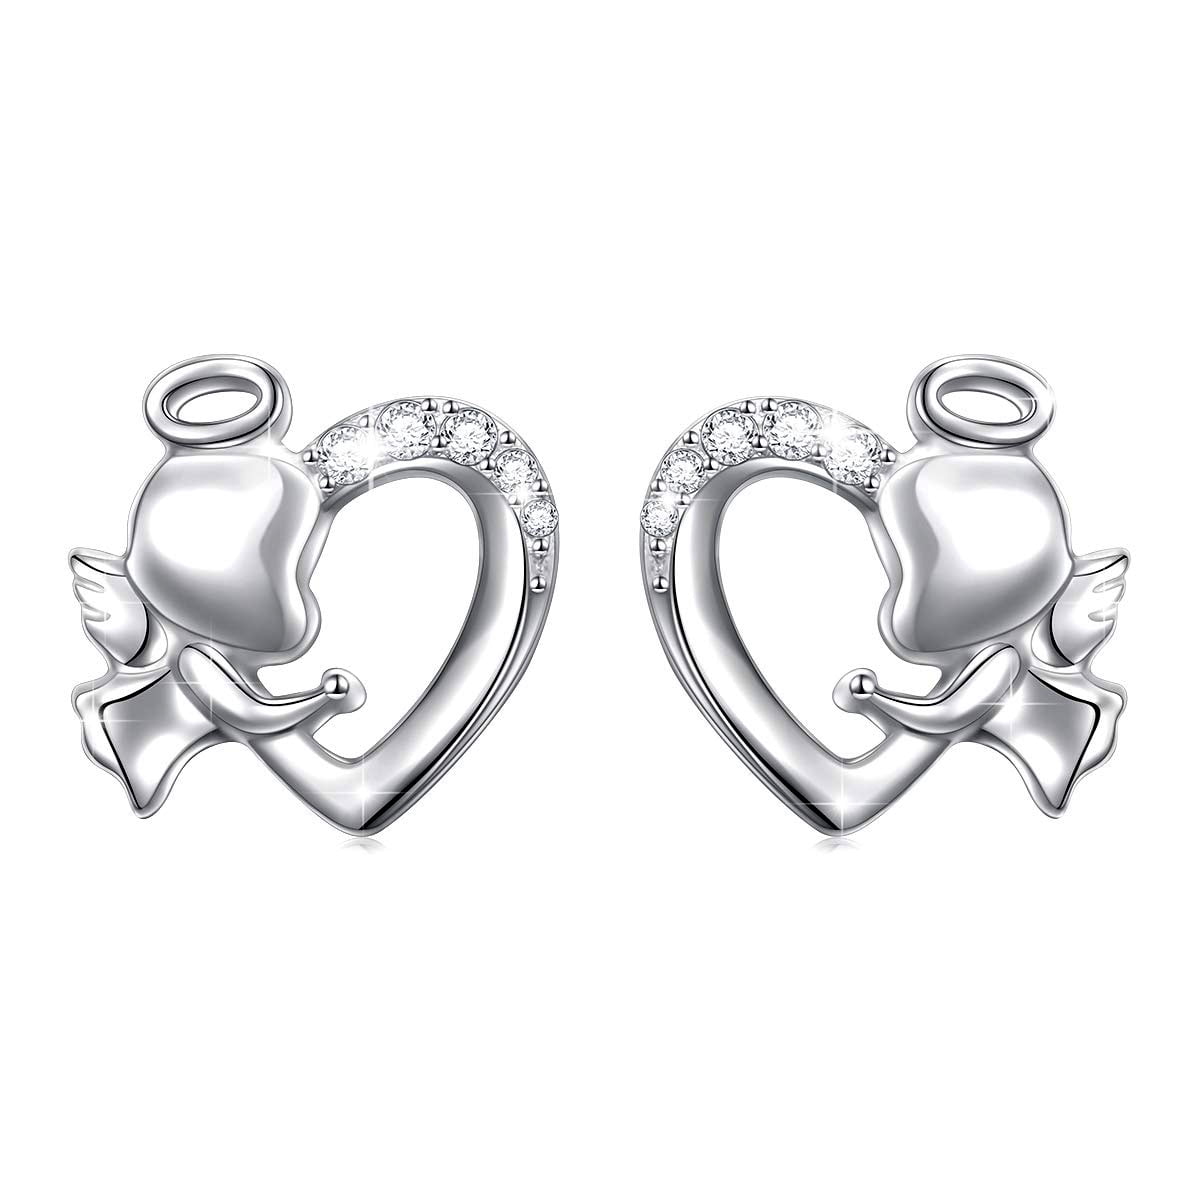 Details about   Gold Finish Freshwater Pearls with Champagne Cubic Zirconia Heart Earrings 